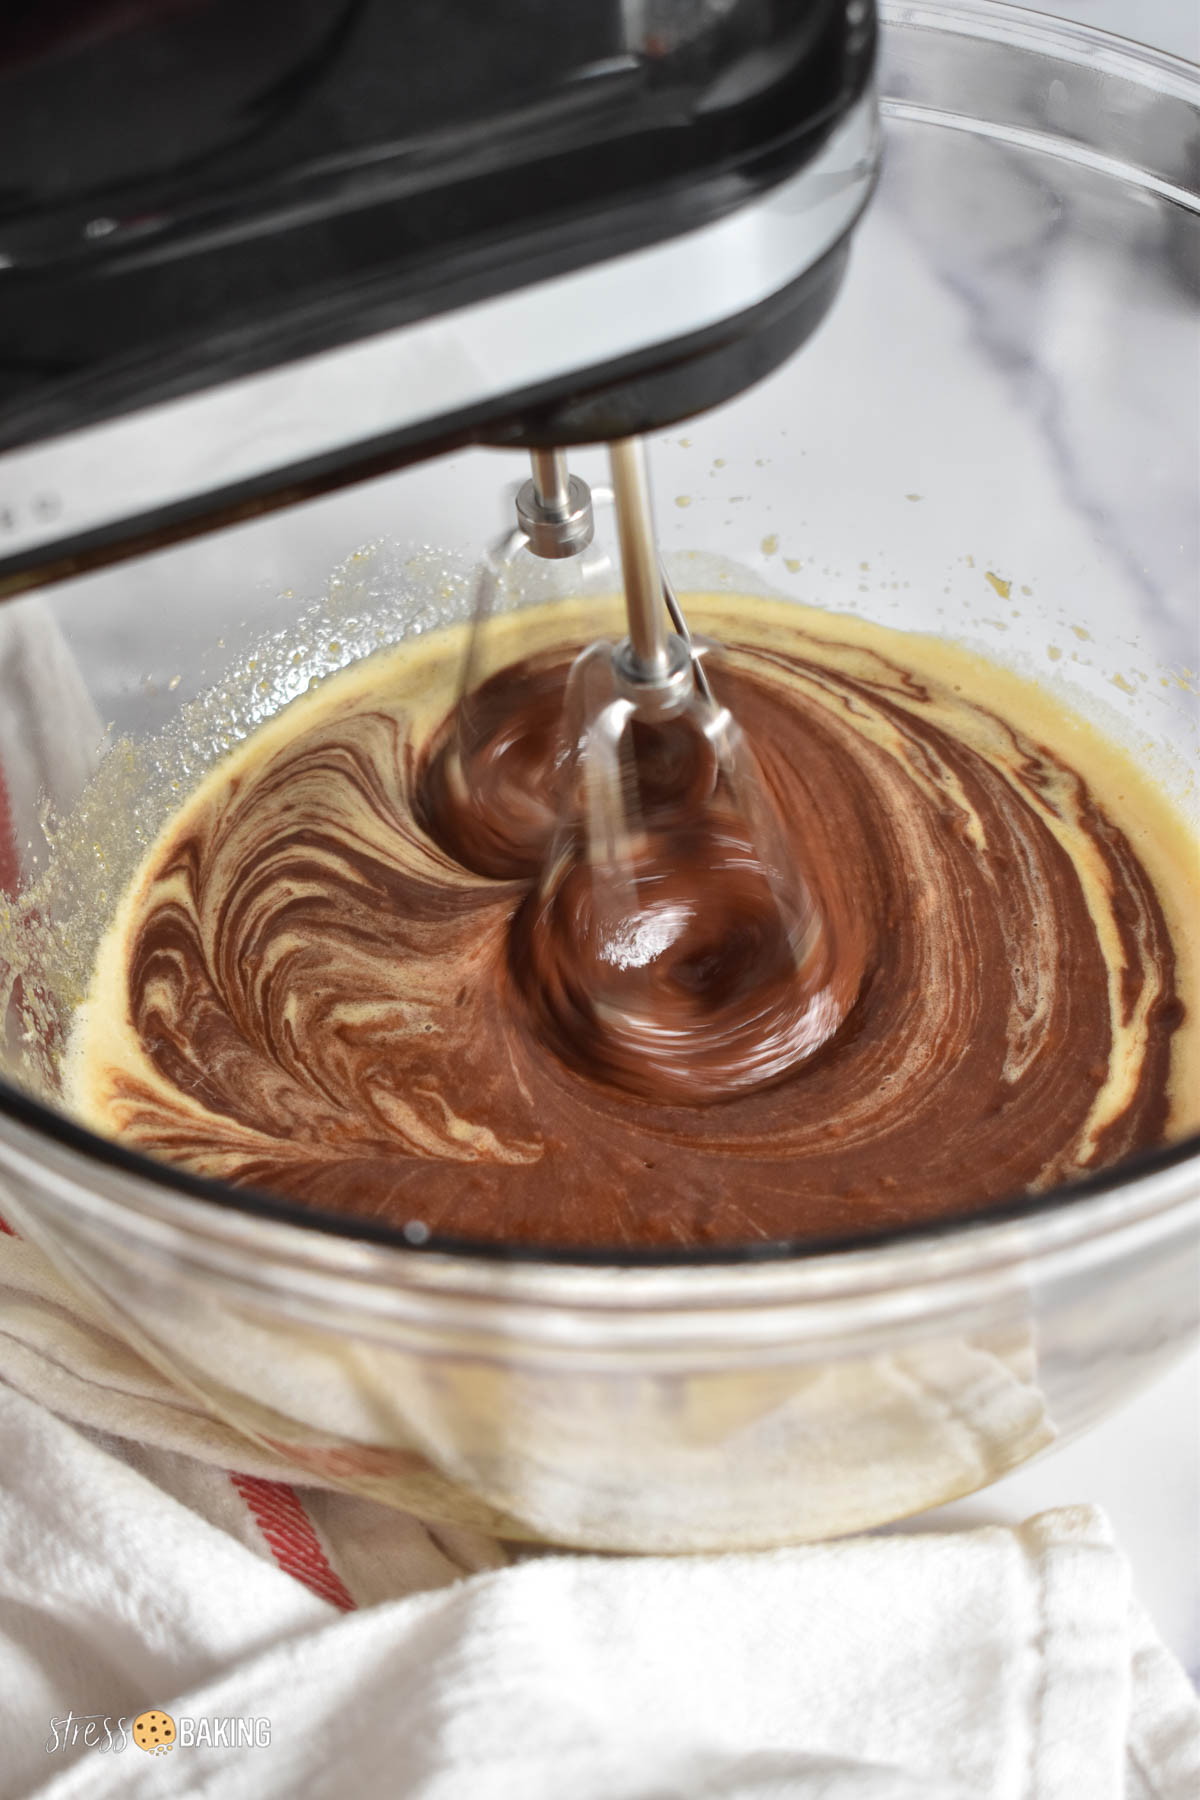 Melted chocolate being mixed into batter with a hand mixer